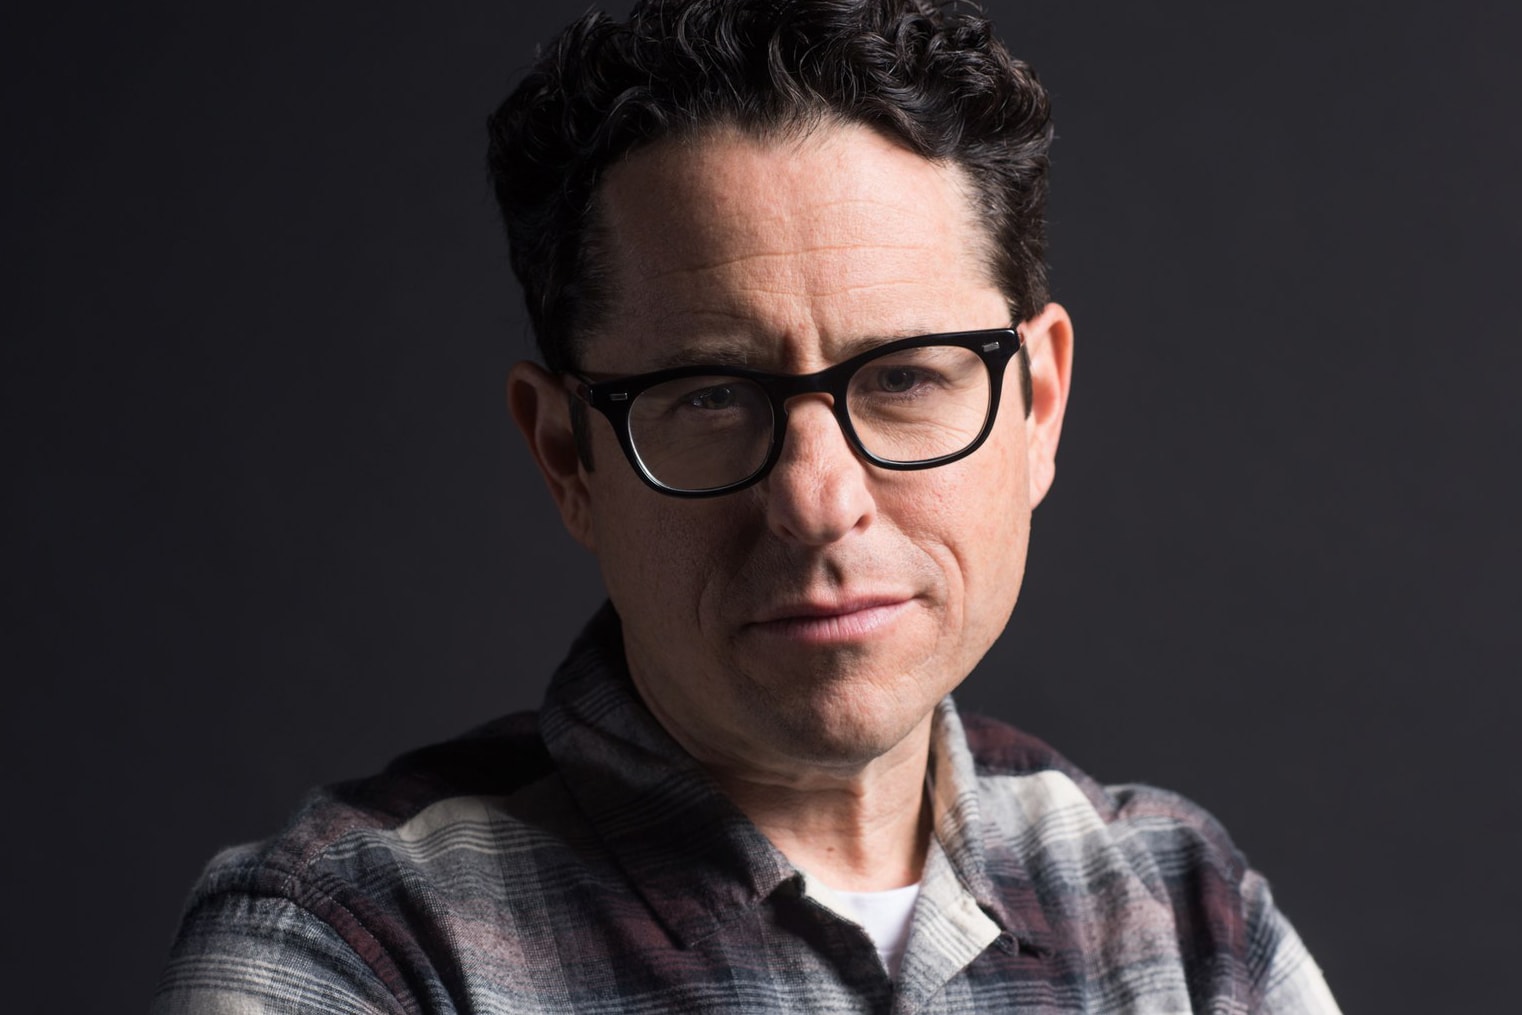 JJ Abrams Bad Robot Games video launch announced gaming tencent warner bros brothers